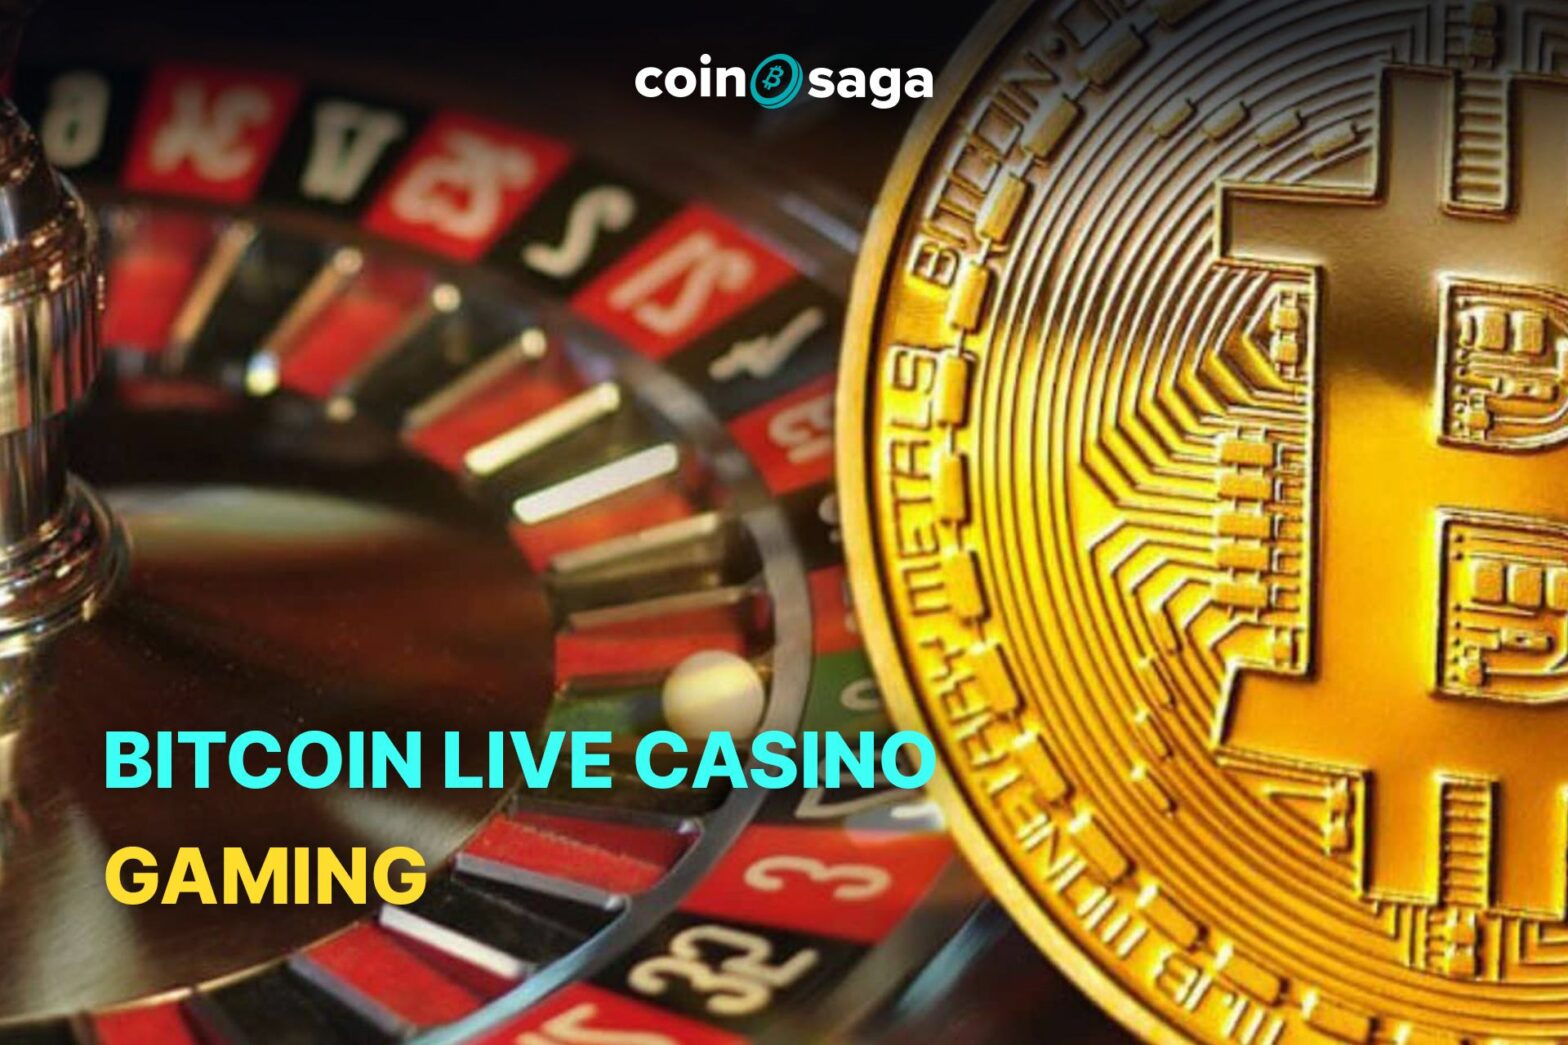 5 Surefire Ways btc casino Will Drive Your Business Into The Ground